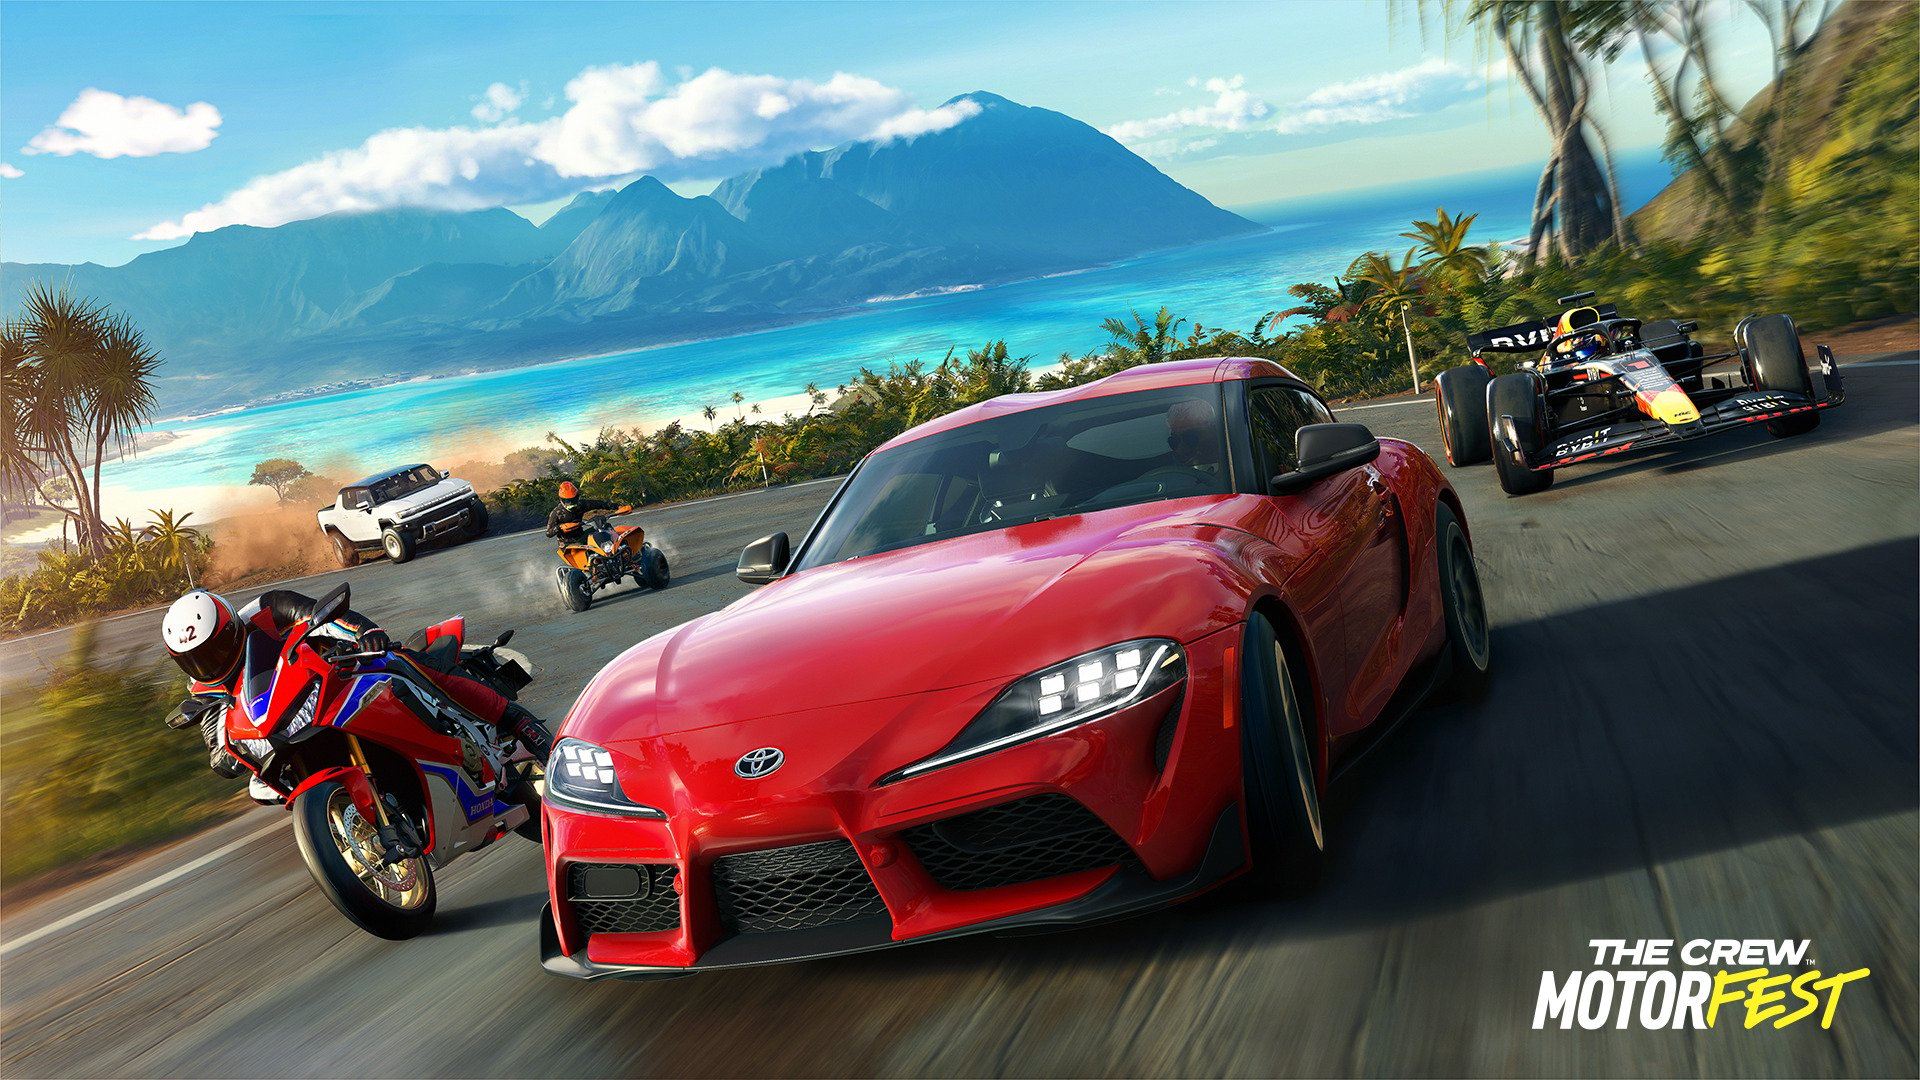 The Crew Motorfest Closed Beta Players Are Reporting Performance Issues, Crashes